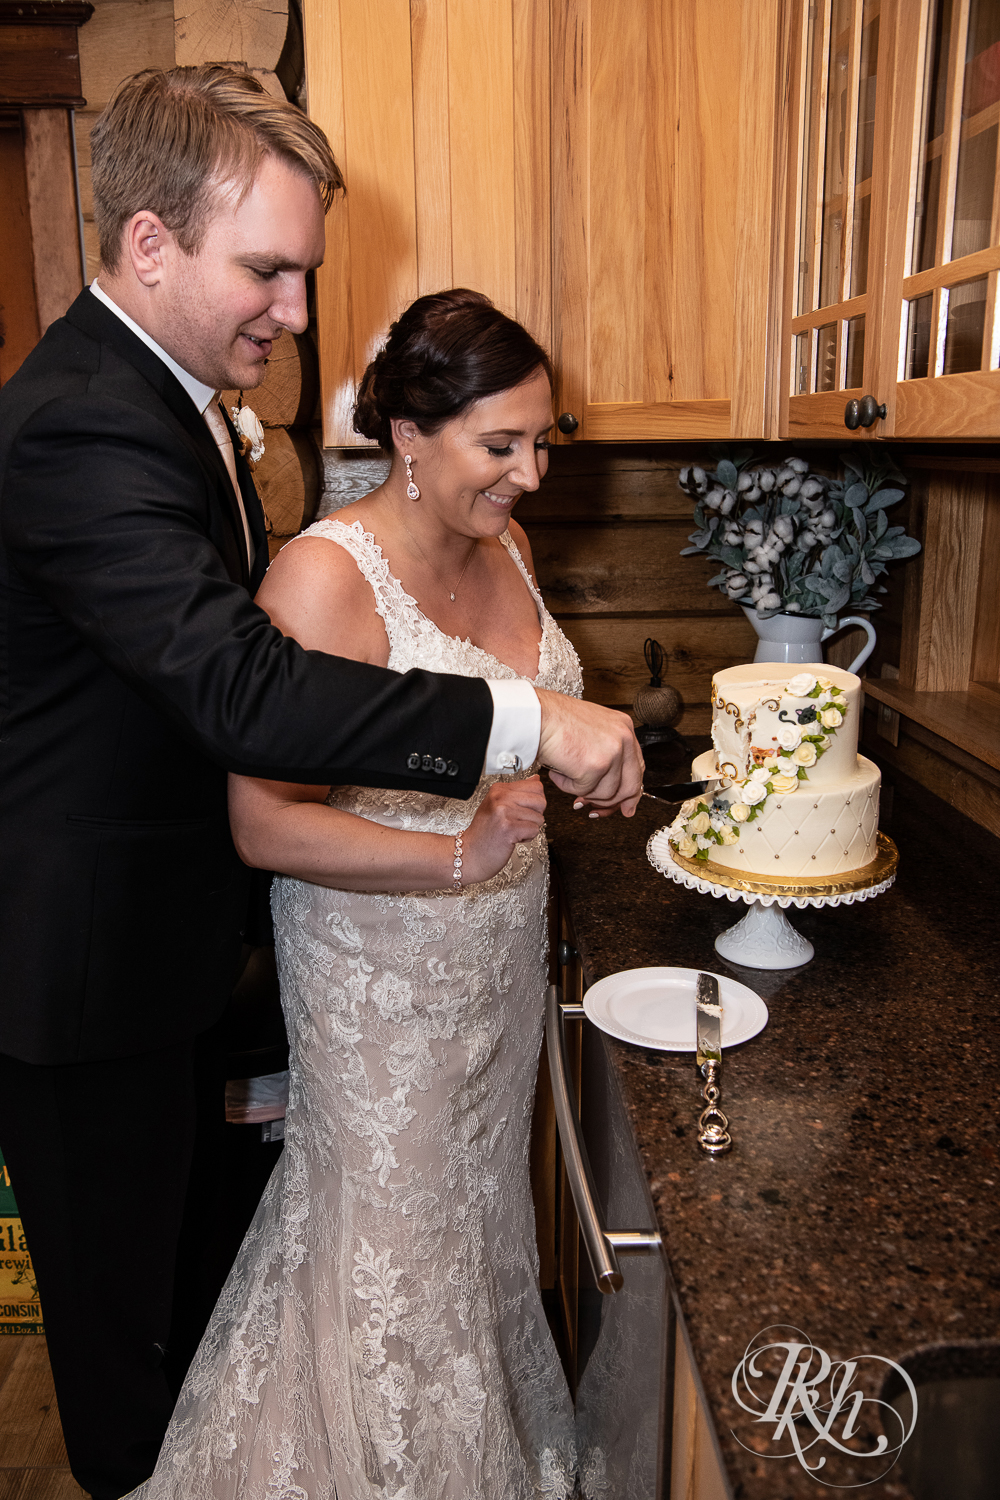 Bride and groom cut cake at wedding in cabin in Stillwater, Minnesota.